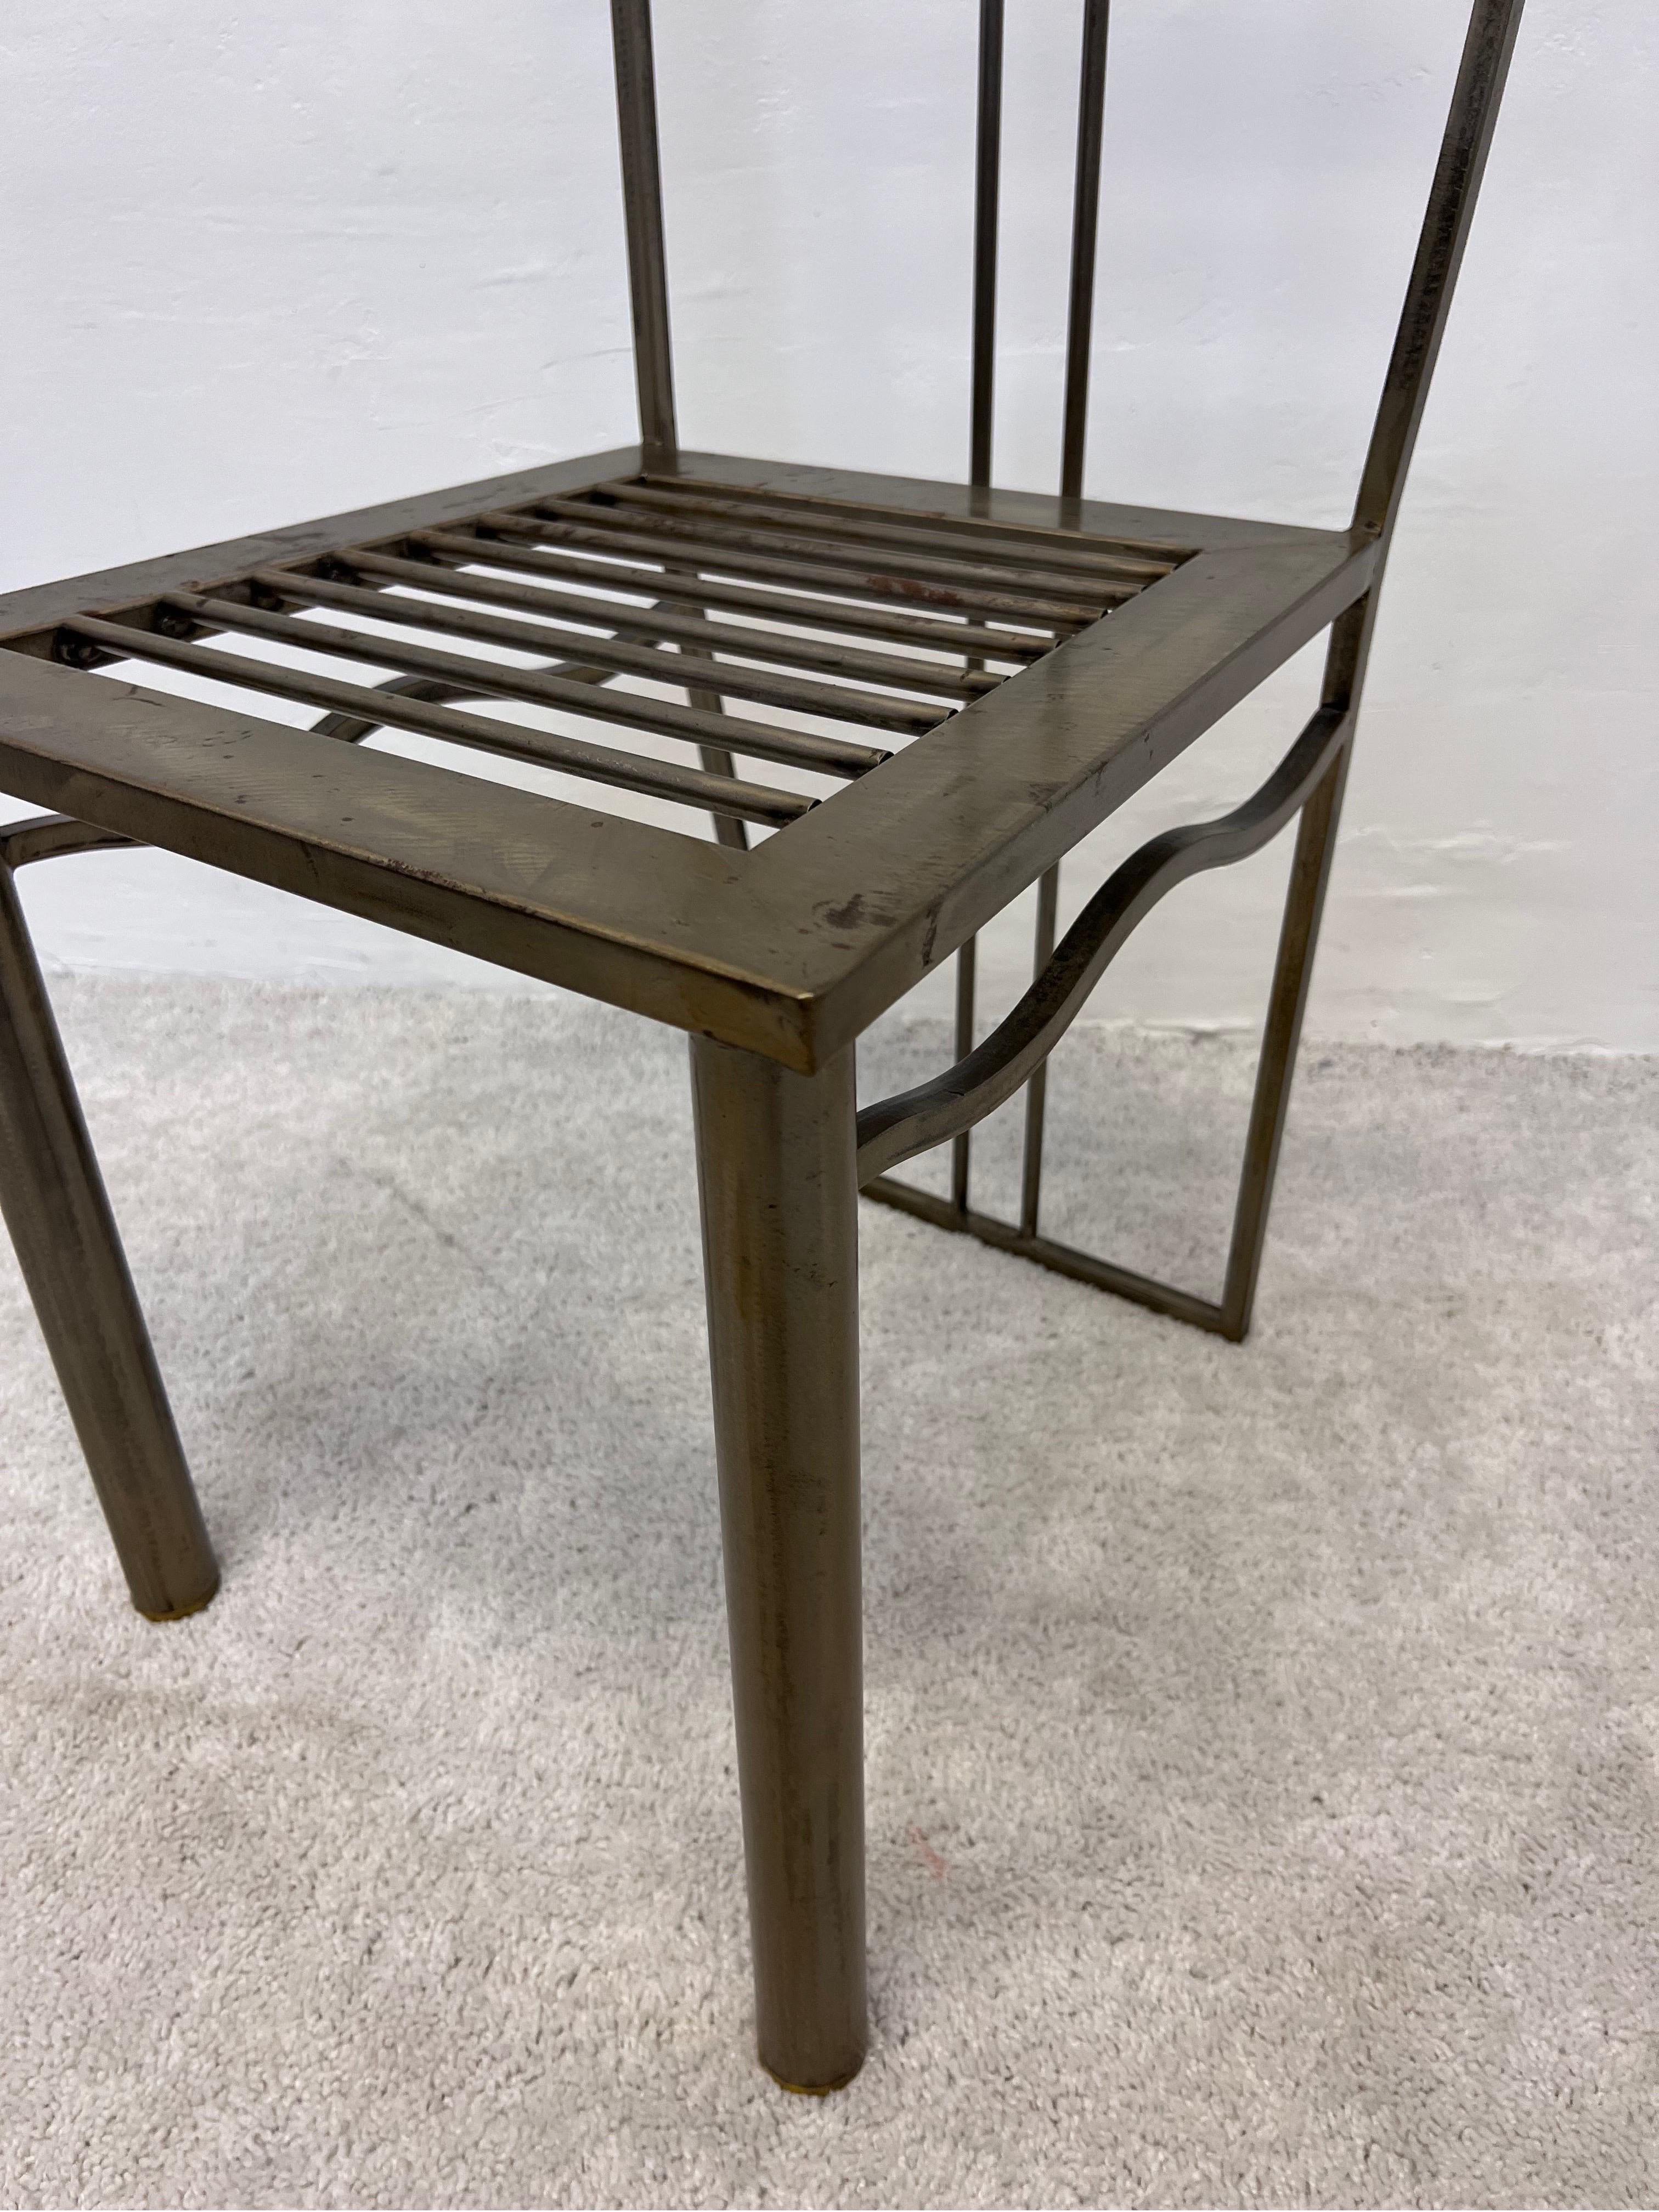 Postmodern Sculptural Studio Crafted Steel Dining or Side Chair, 1990s For Sale 4